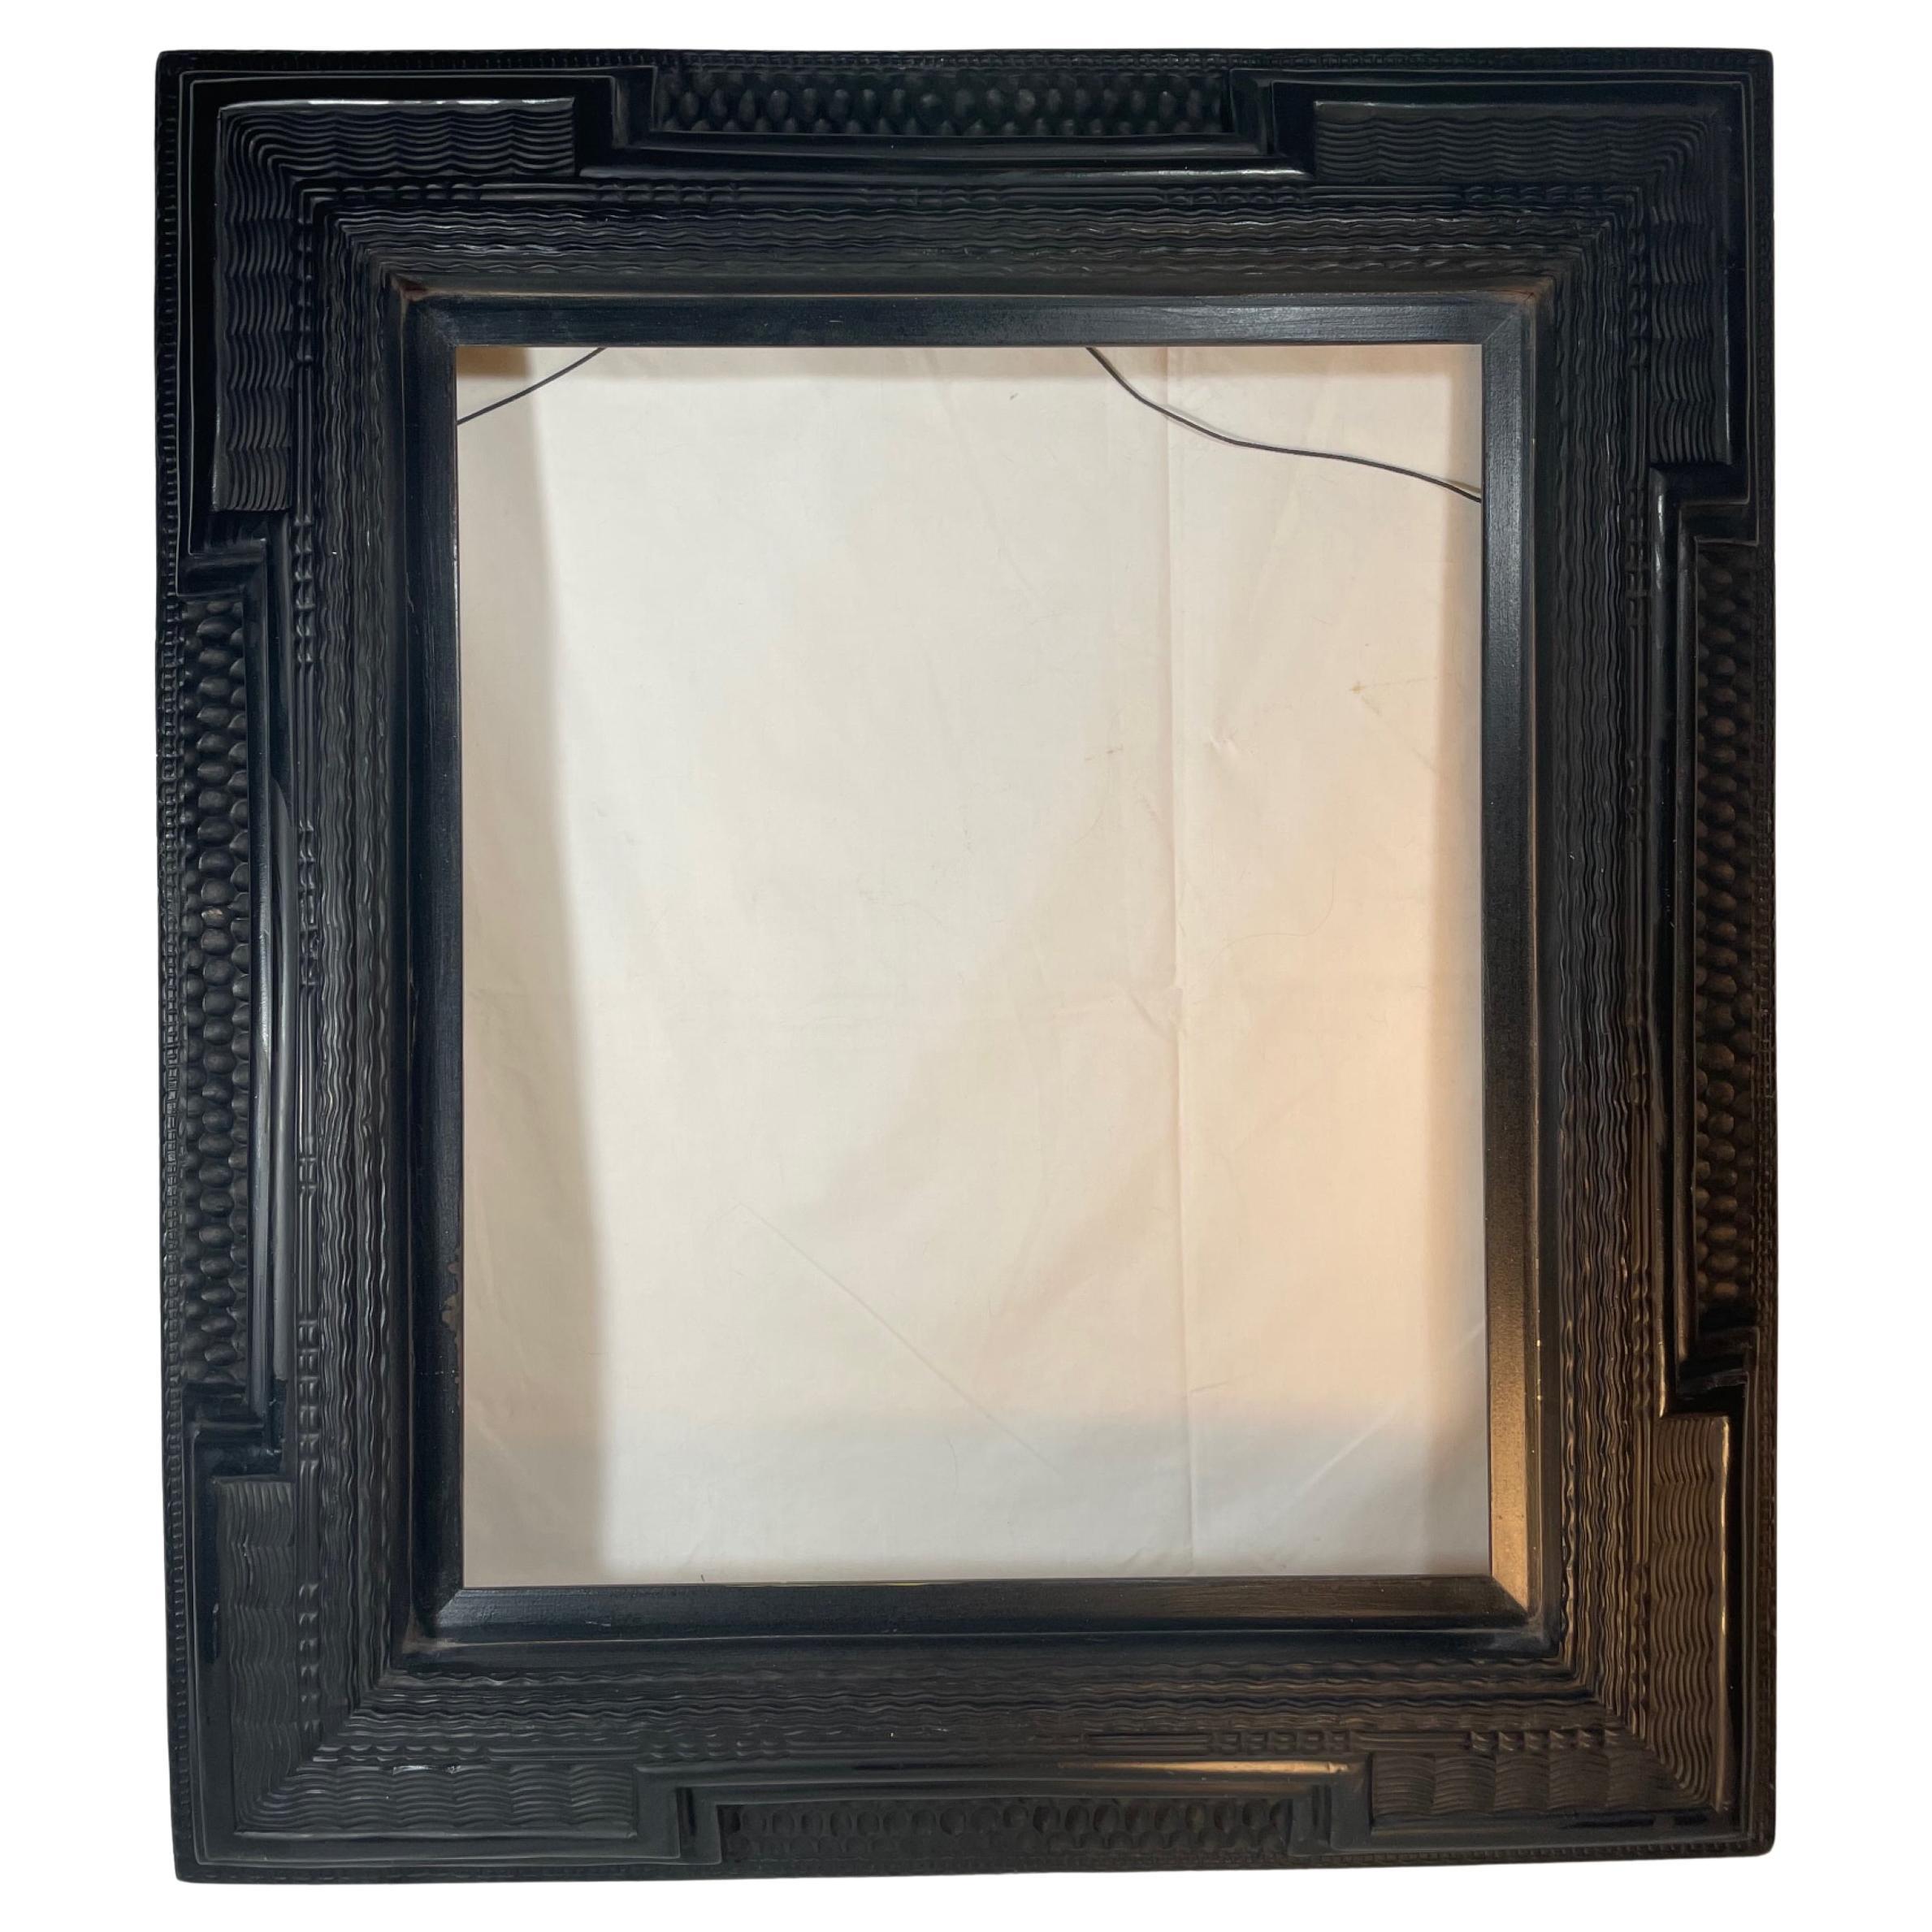 Dutch Ebonized Ripple Molded Picture Frame Early 20th Century